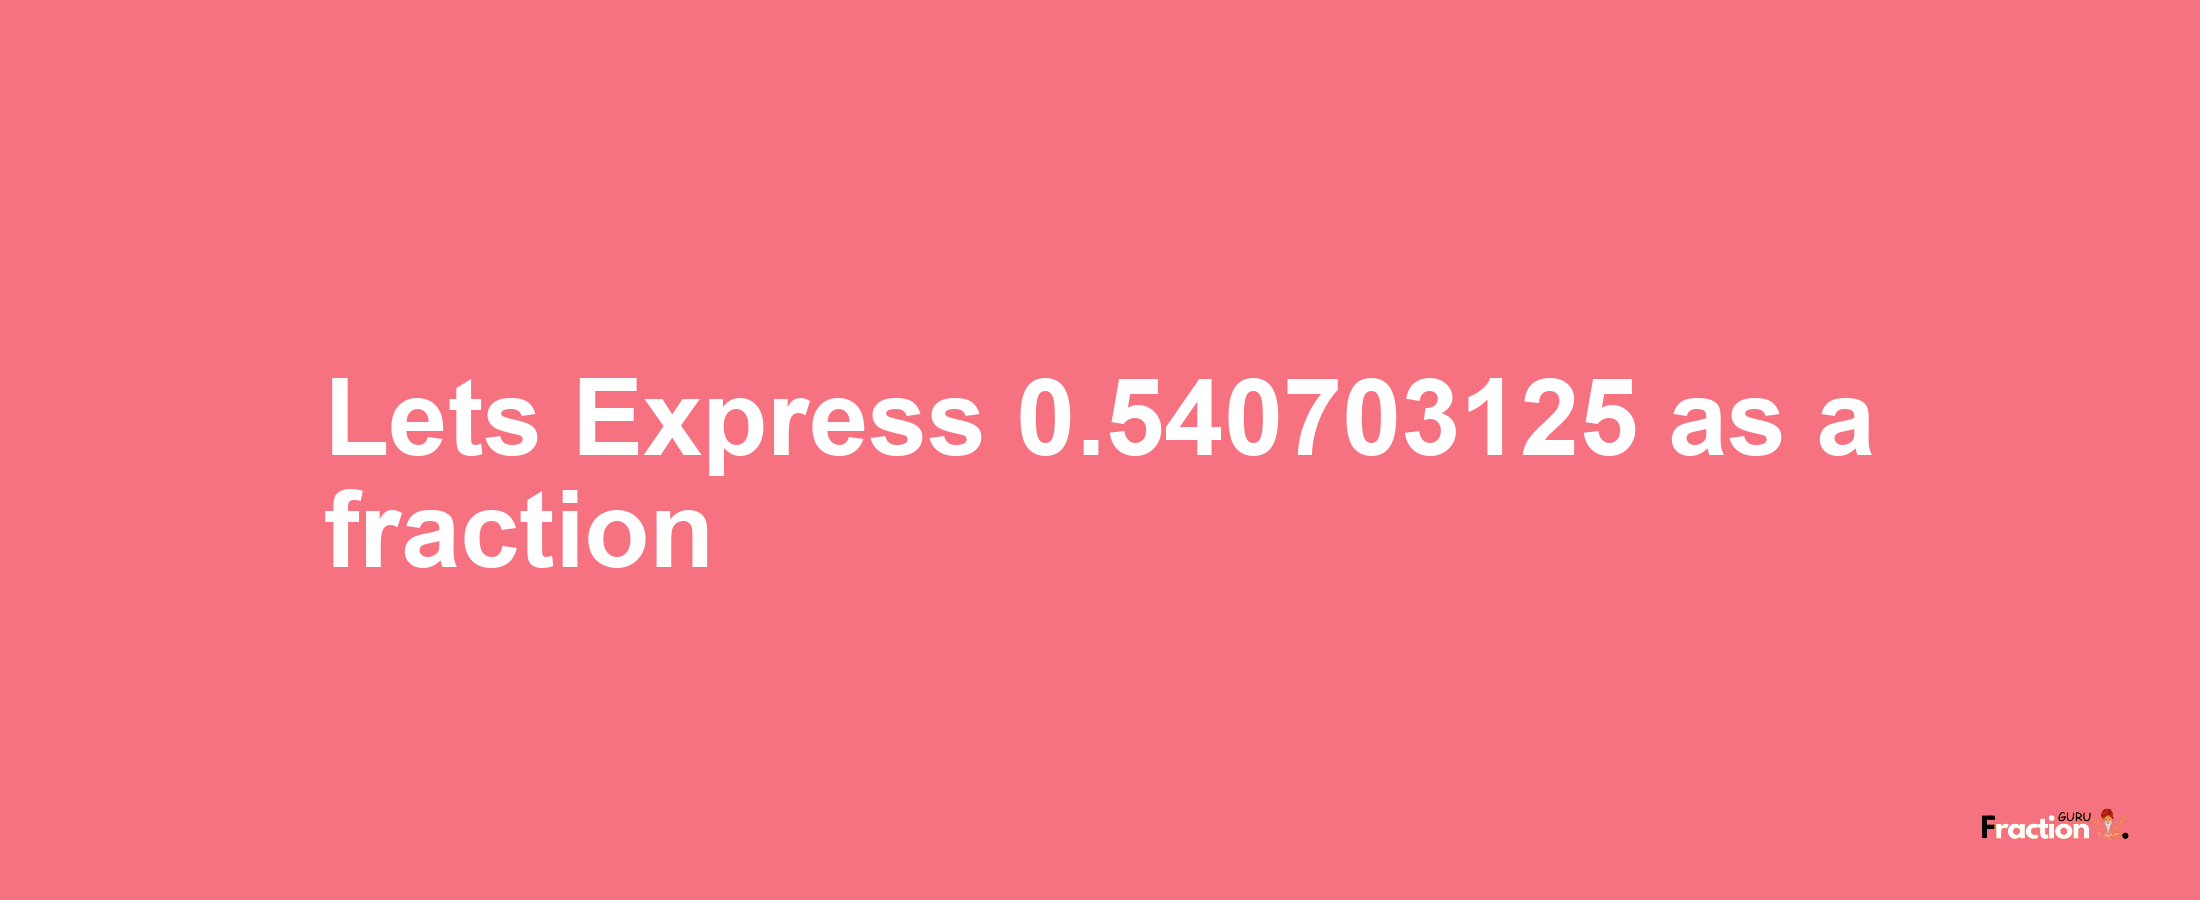 Lets Express 0.540703125 as afraction